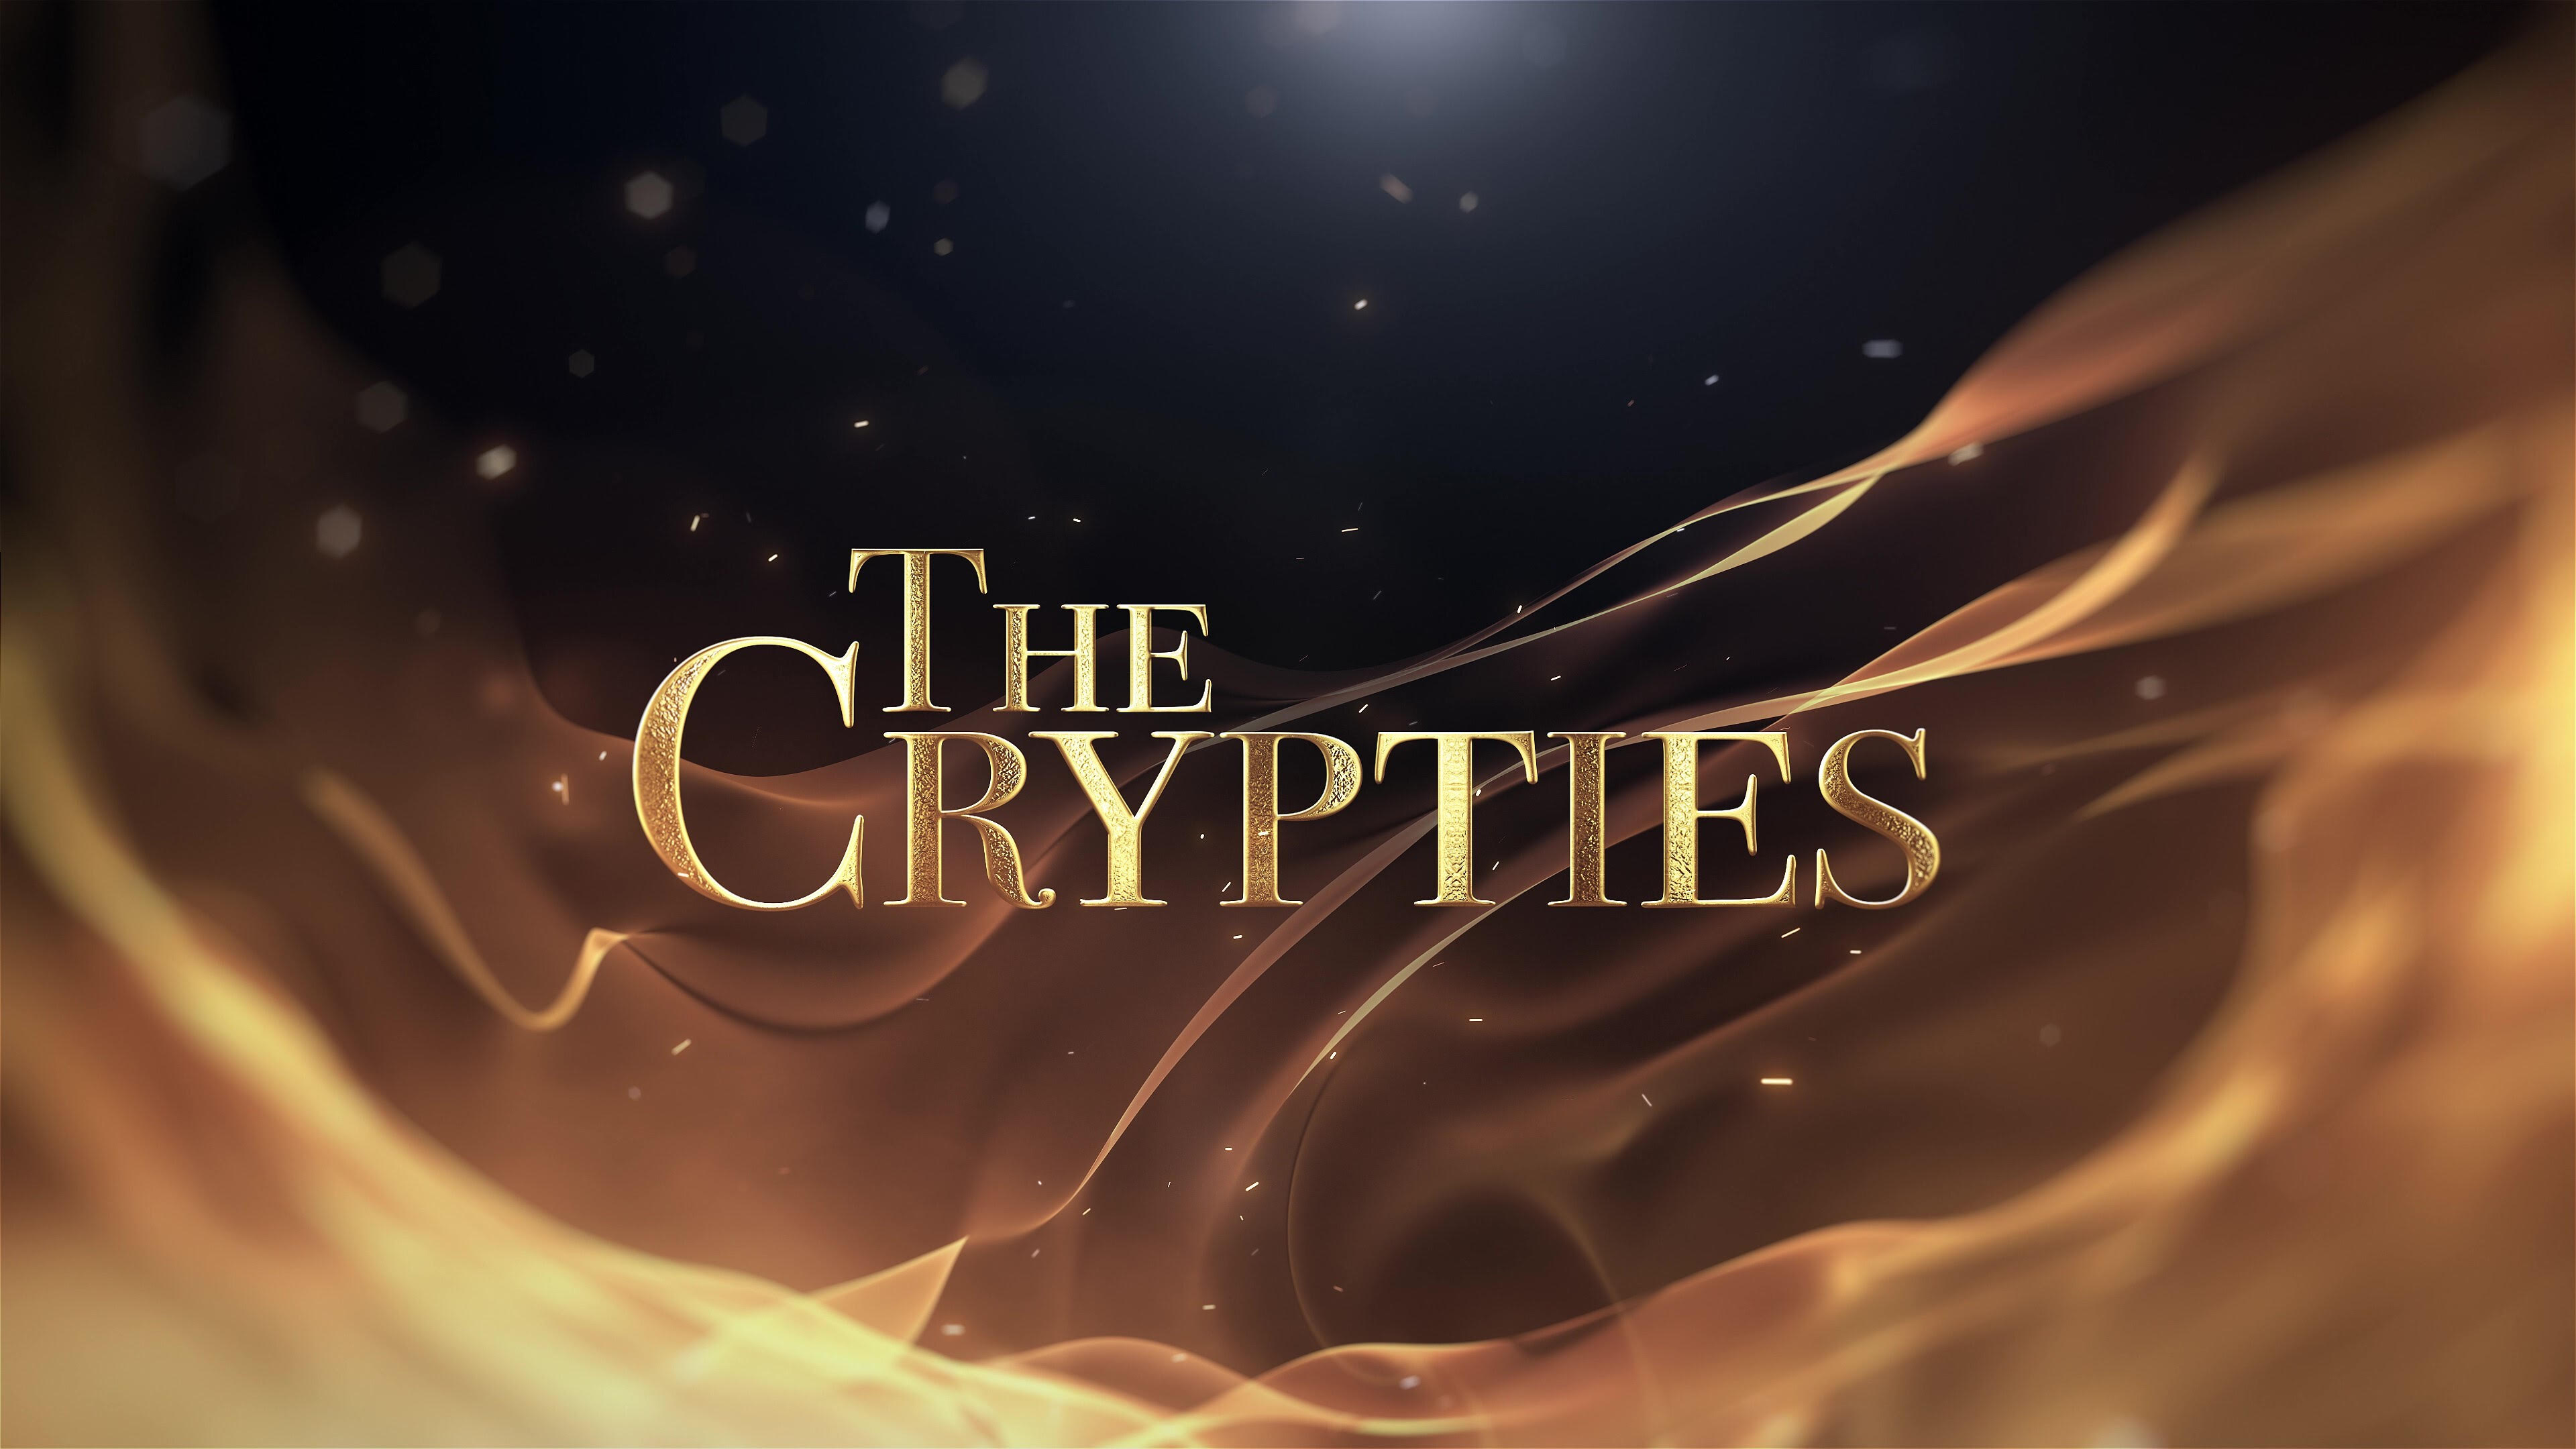 The Crypties